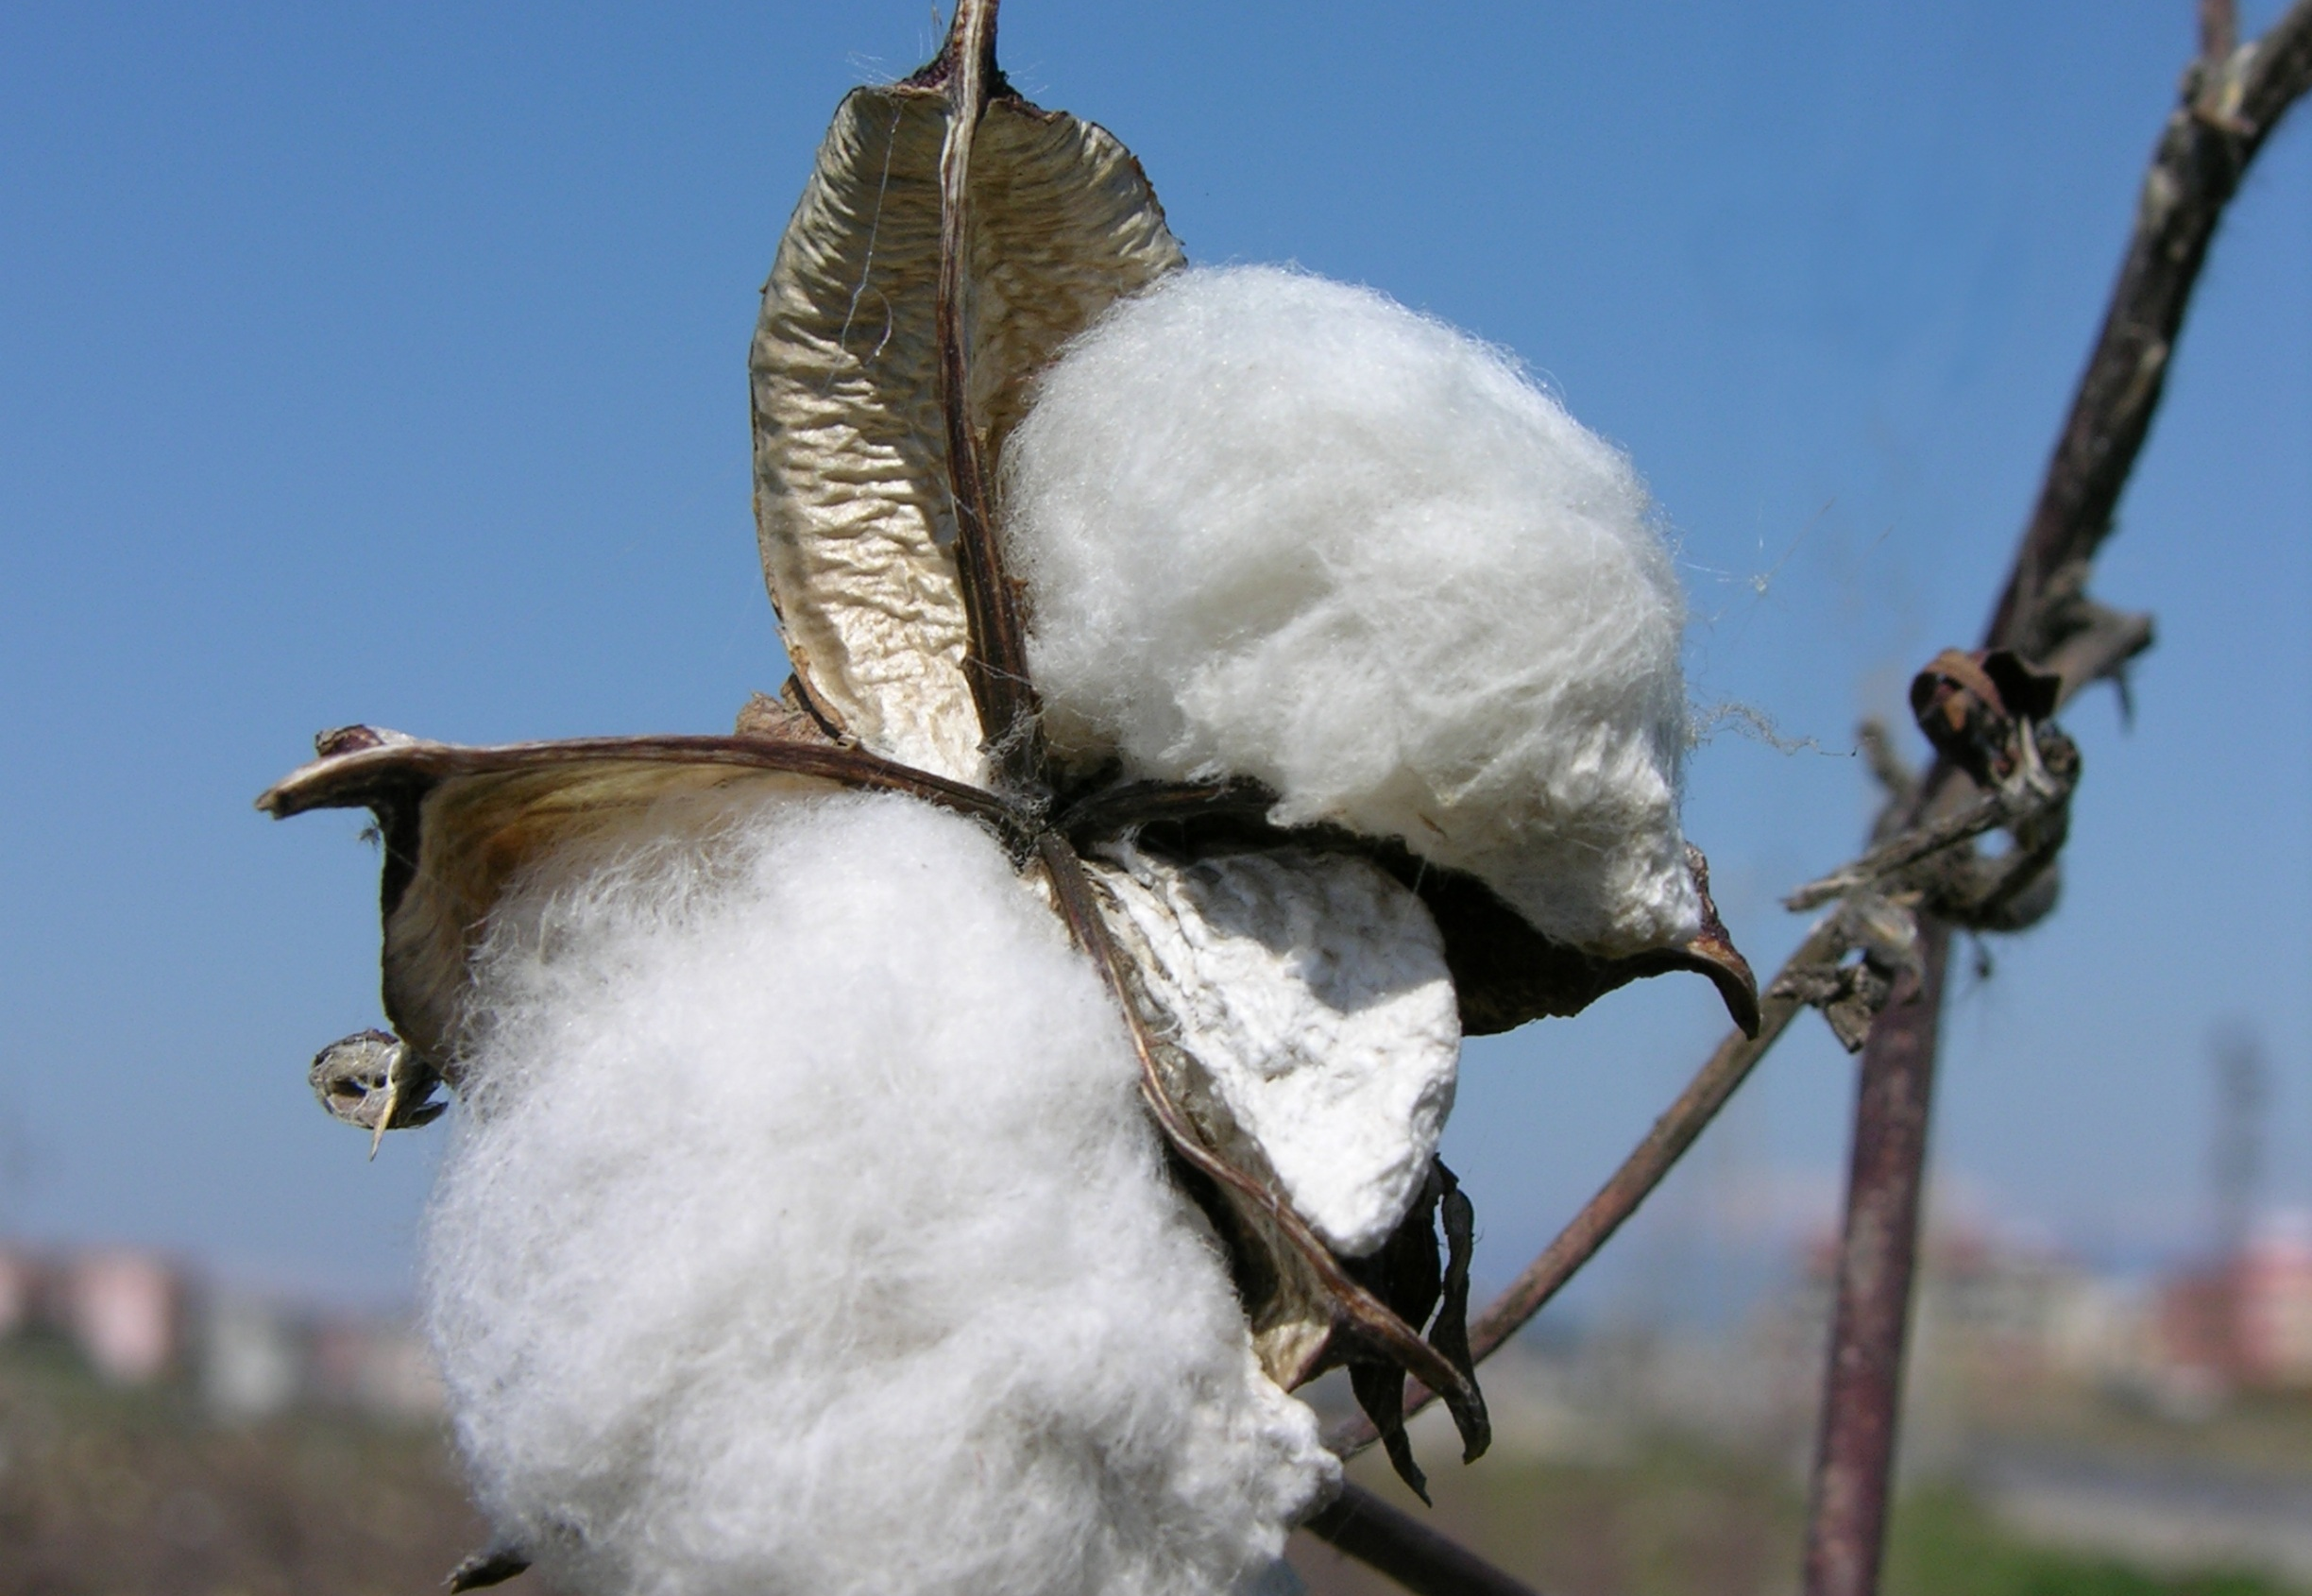 Natural Fibers’ Textile Supply Chains